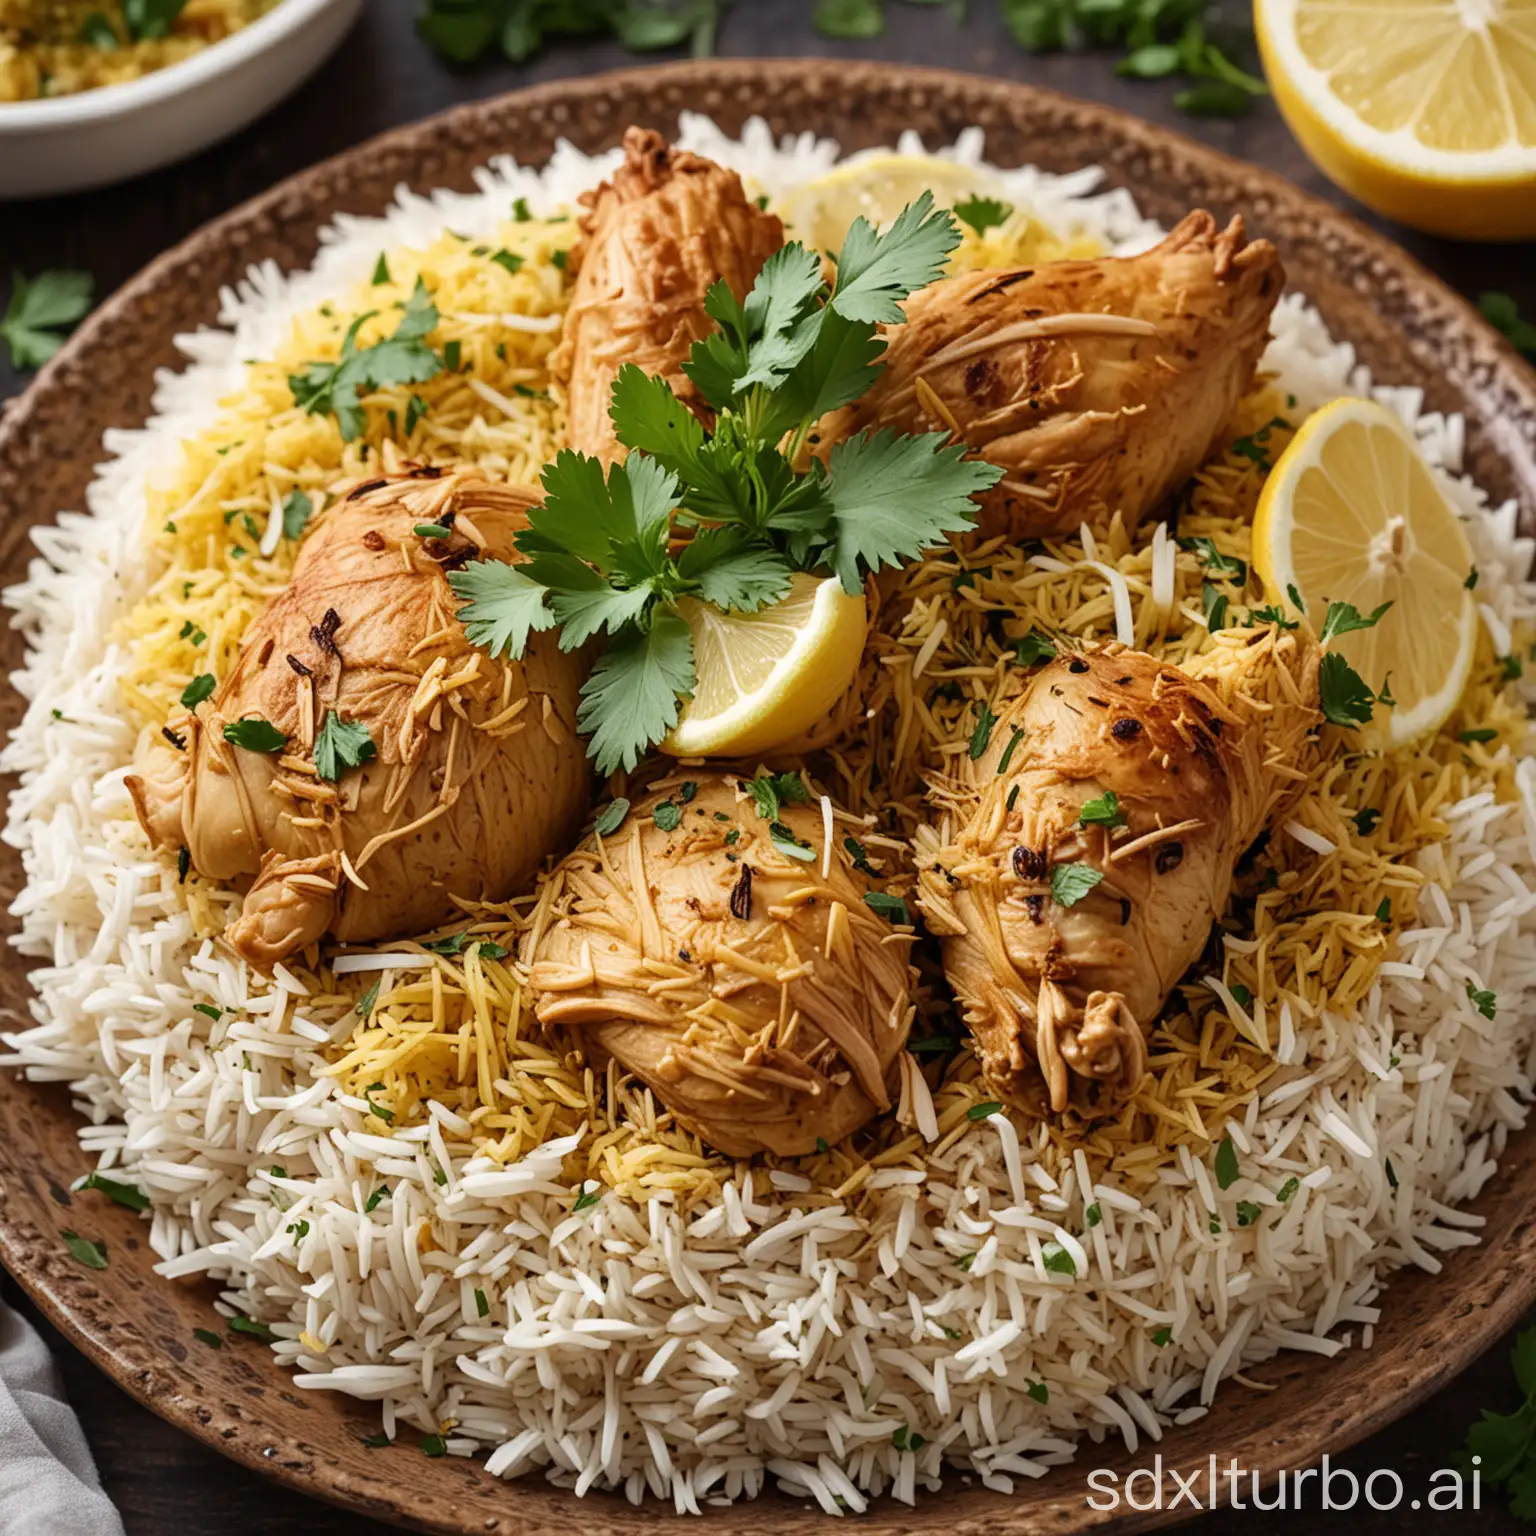 A close-up image of a plate of steaming, fragrant biryani. The rice is fluffy and golden, and the chicken is tender and juicy. The biryani is garnished with fresh cilantro and mint, and a wedge of lemon.